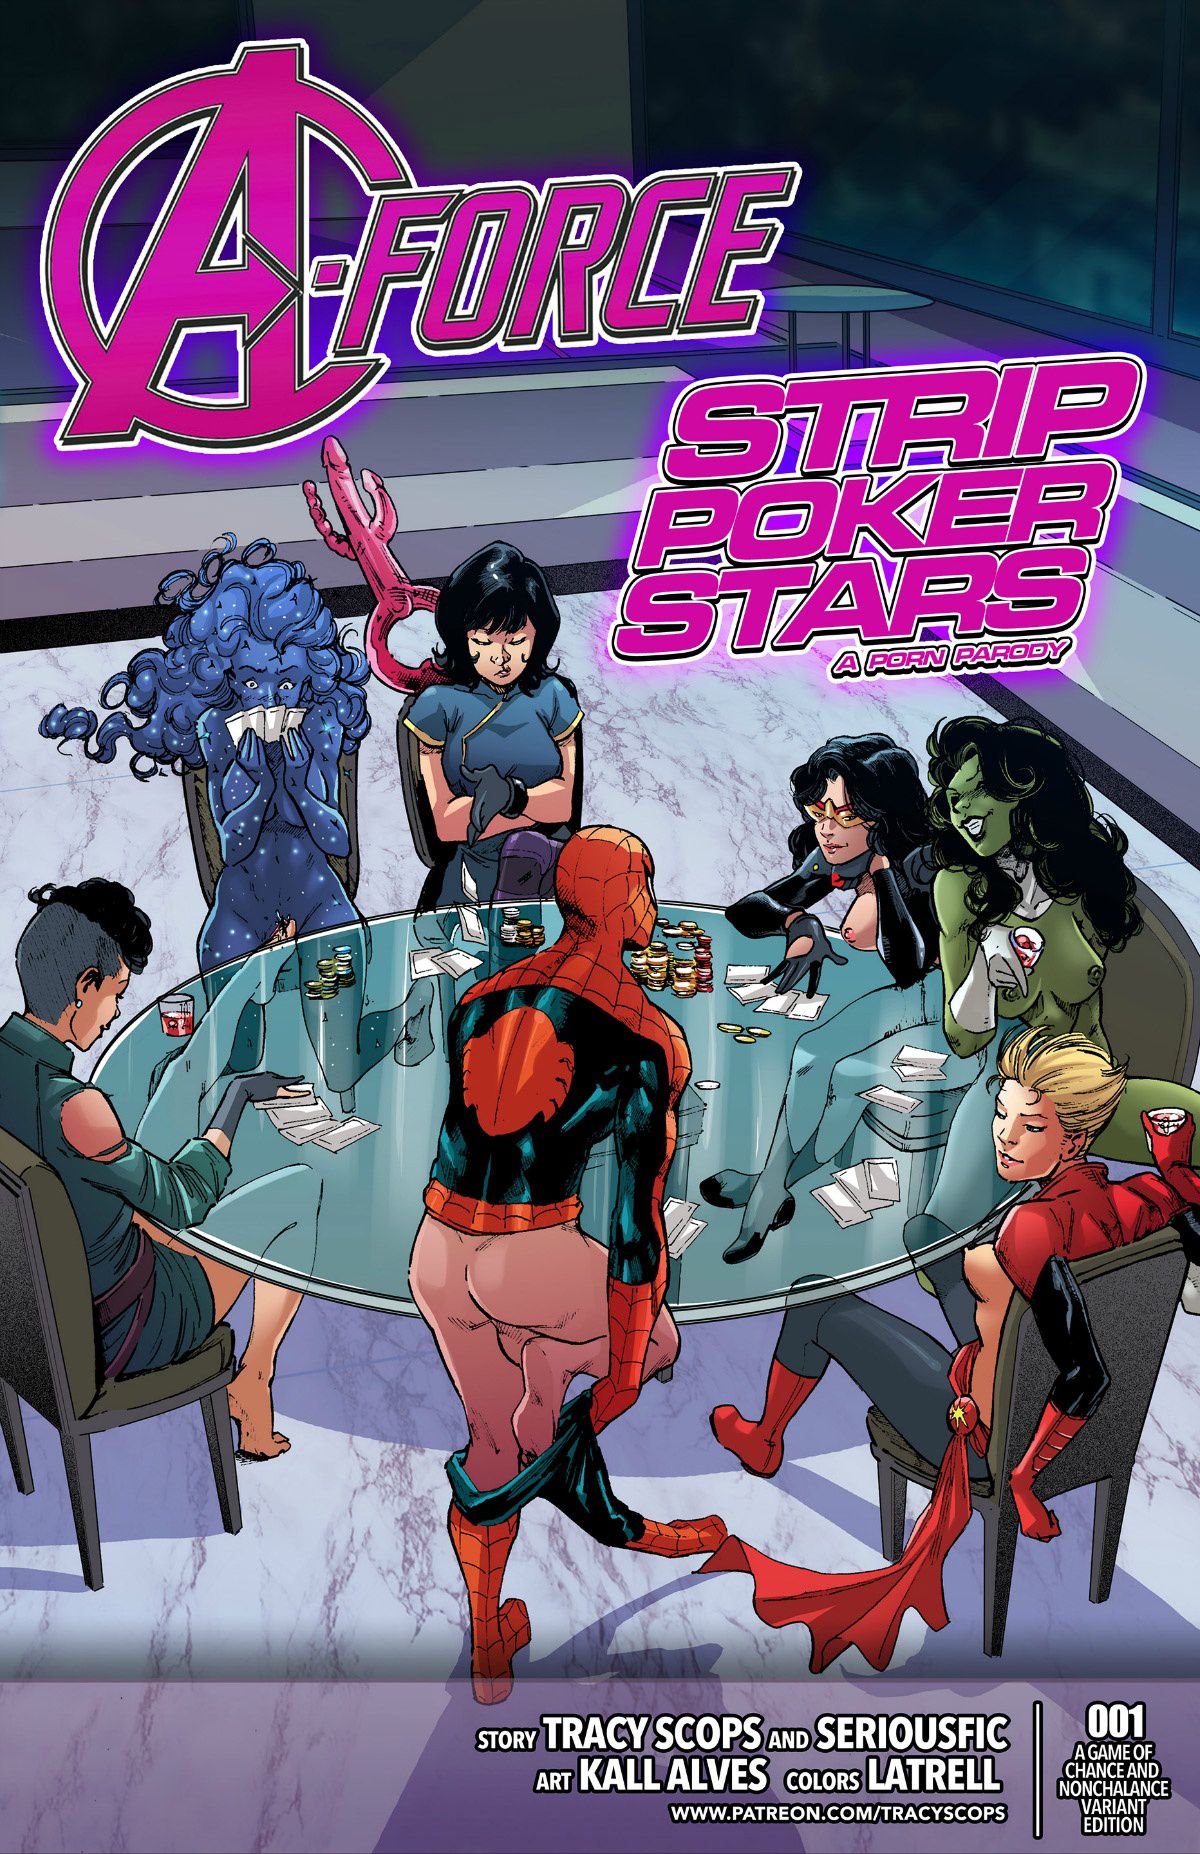 A-Force Strip Poker Stars (Spider-Man , The Avengers) Tracy Scops - 1  pic